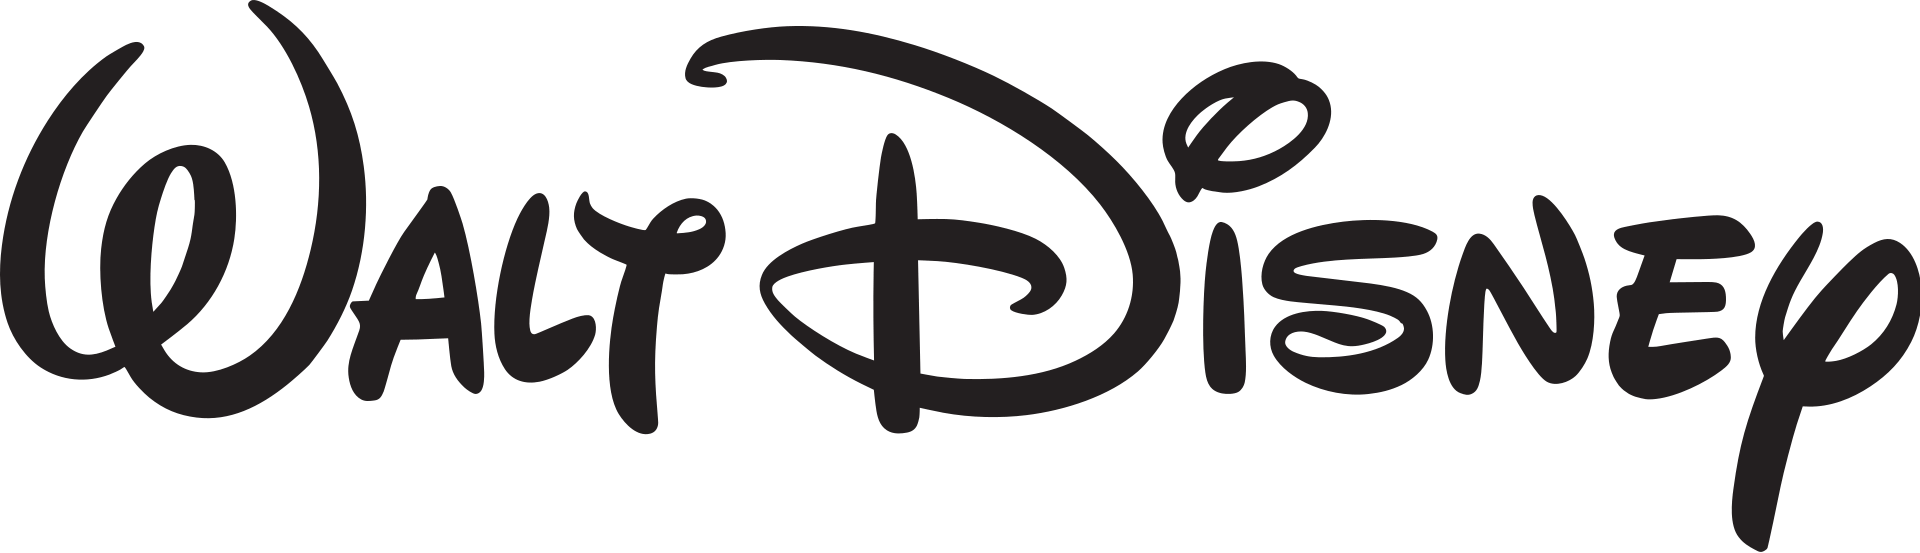 In this example, we experiment with rebranding the well-known Disney company logo. As it originally had only a black-and-white format, we added vibrant colors to it by using a colored background. We fill the background with a beautiful dodger blue color and view the bright logo result in the output. (Source: Wikipedia.)